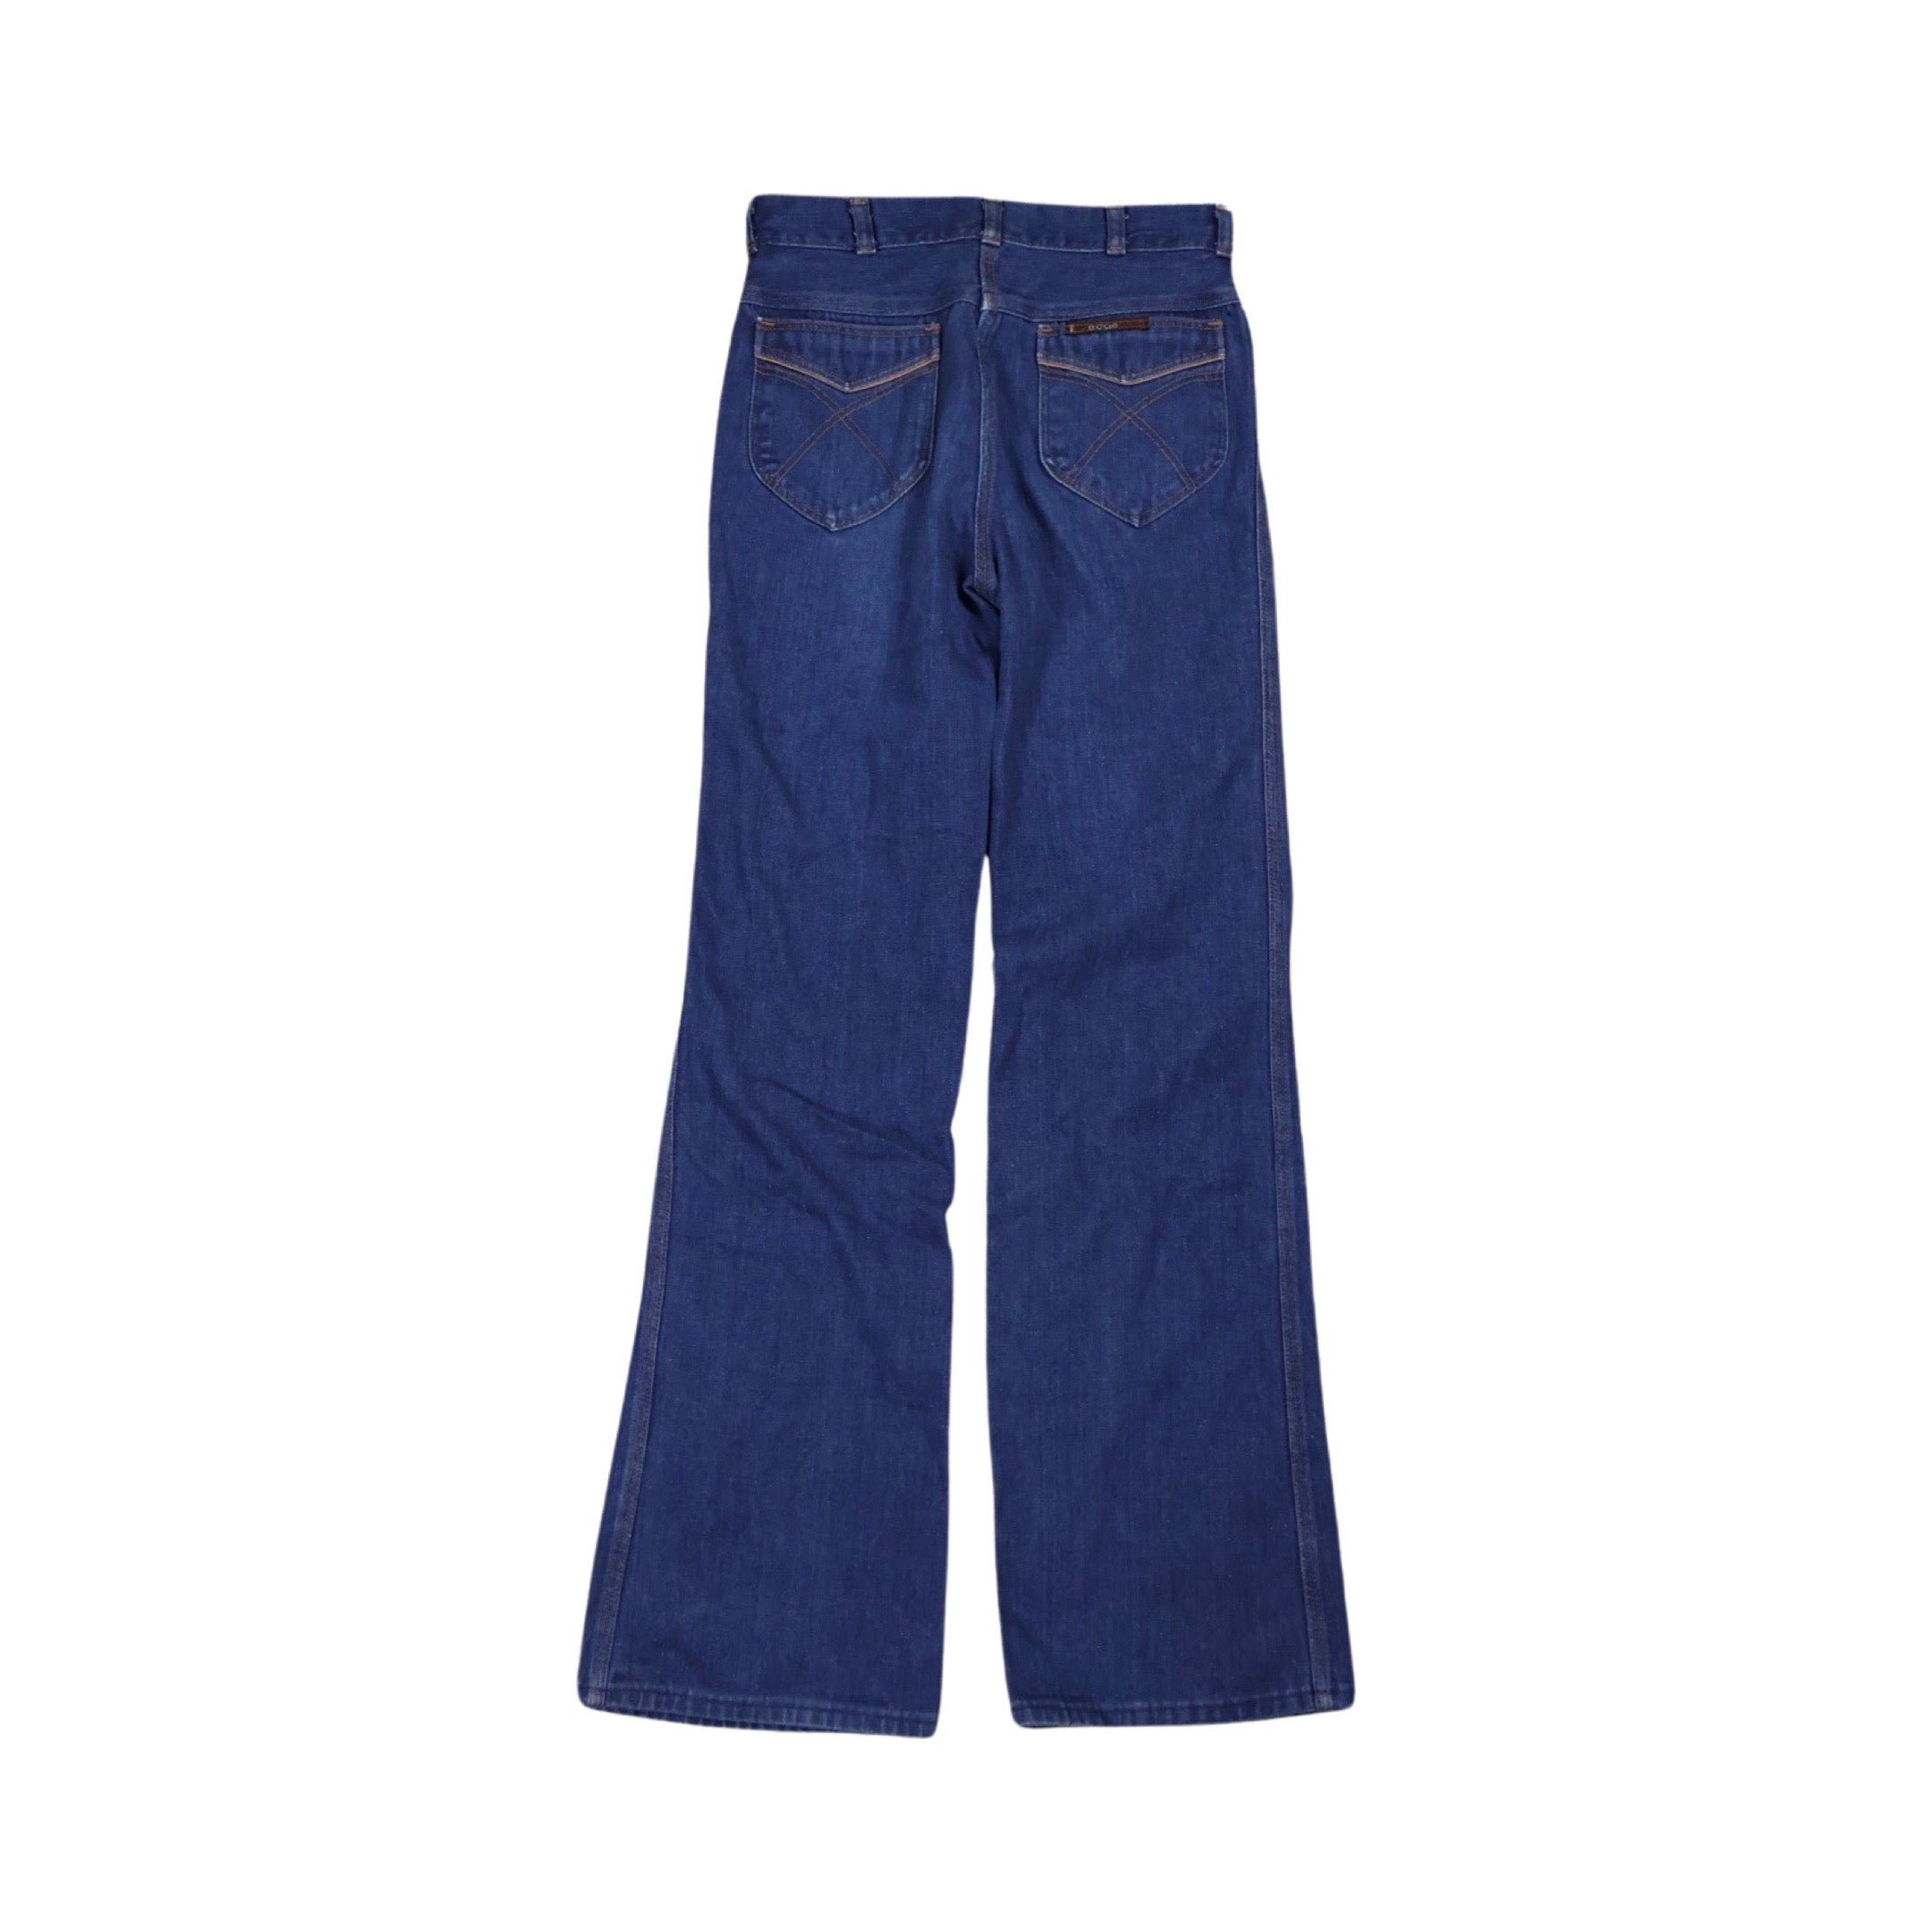 Sedgefield 70s/80s Flare Jeans Essential (27”)